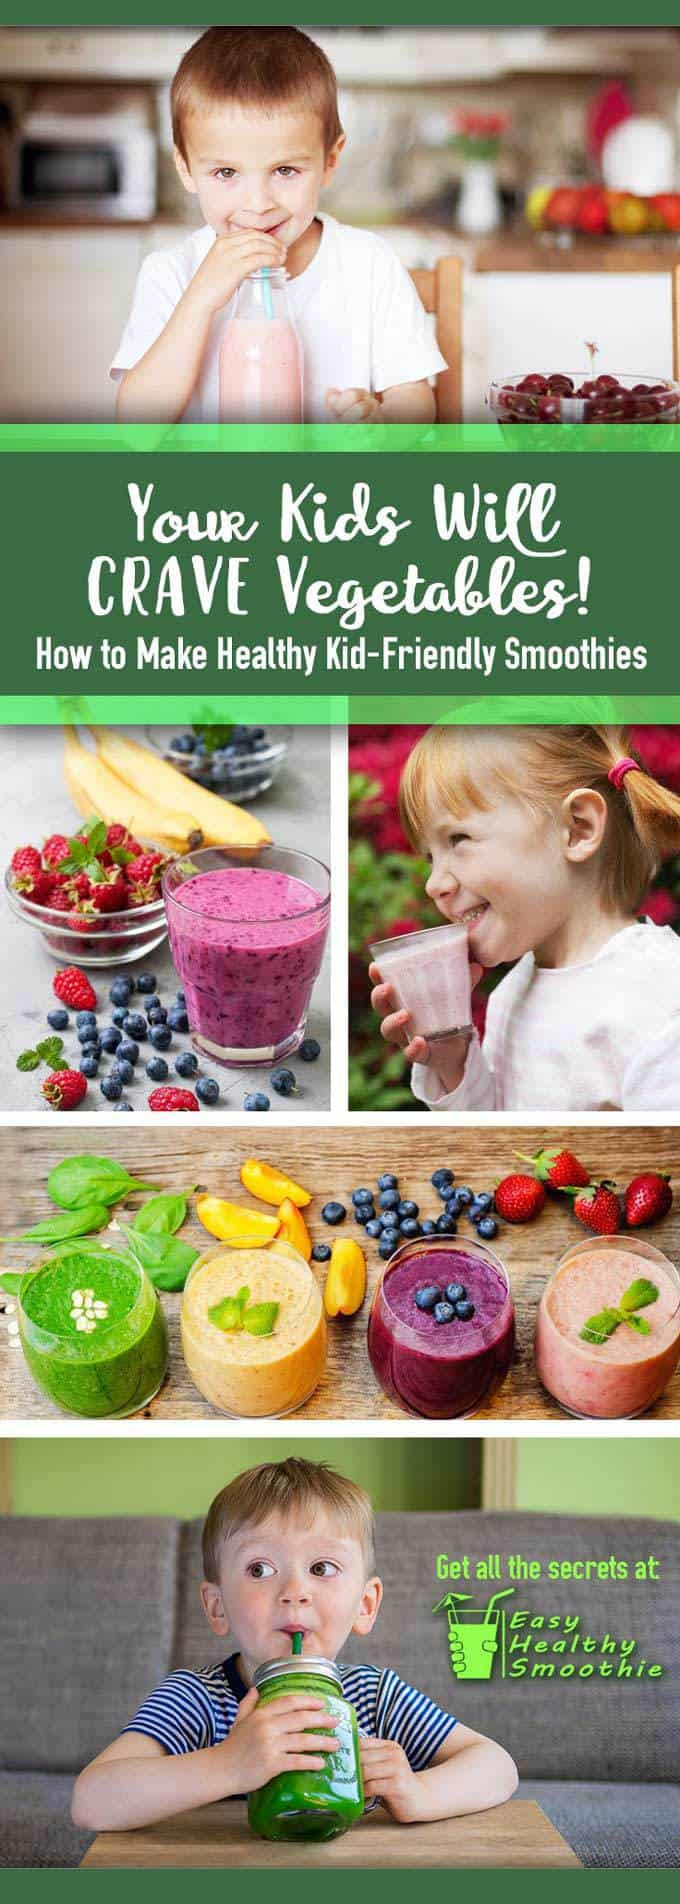 Healthy Kid Friendly Smoothies
 How to Make Ve able Smoothies Your Kids Will Love